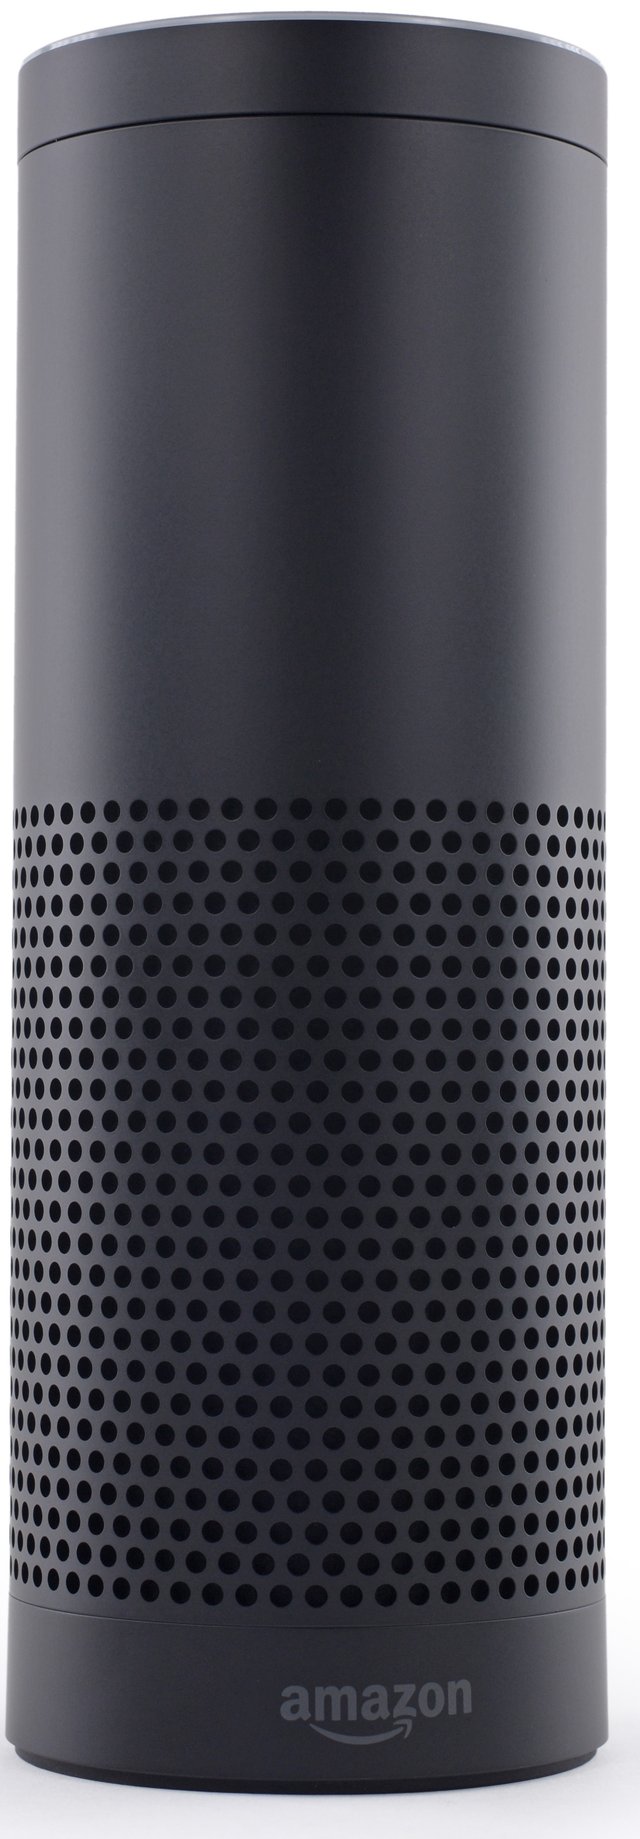 The first-generation Amazon Echo